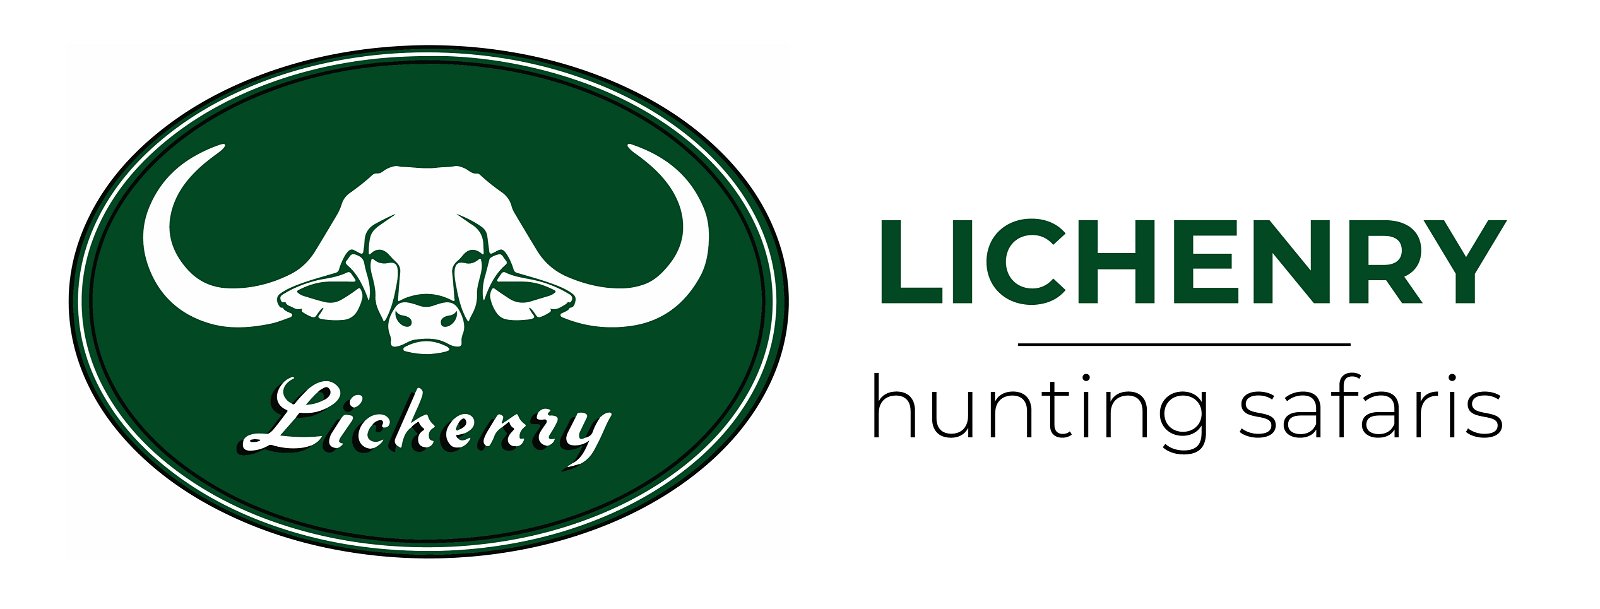 Lichenry Hunting Safaris - South Africa’s Premium Hunting Outfitter